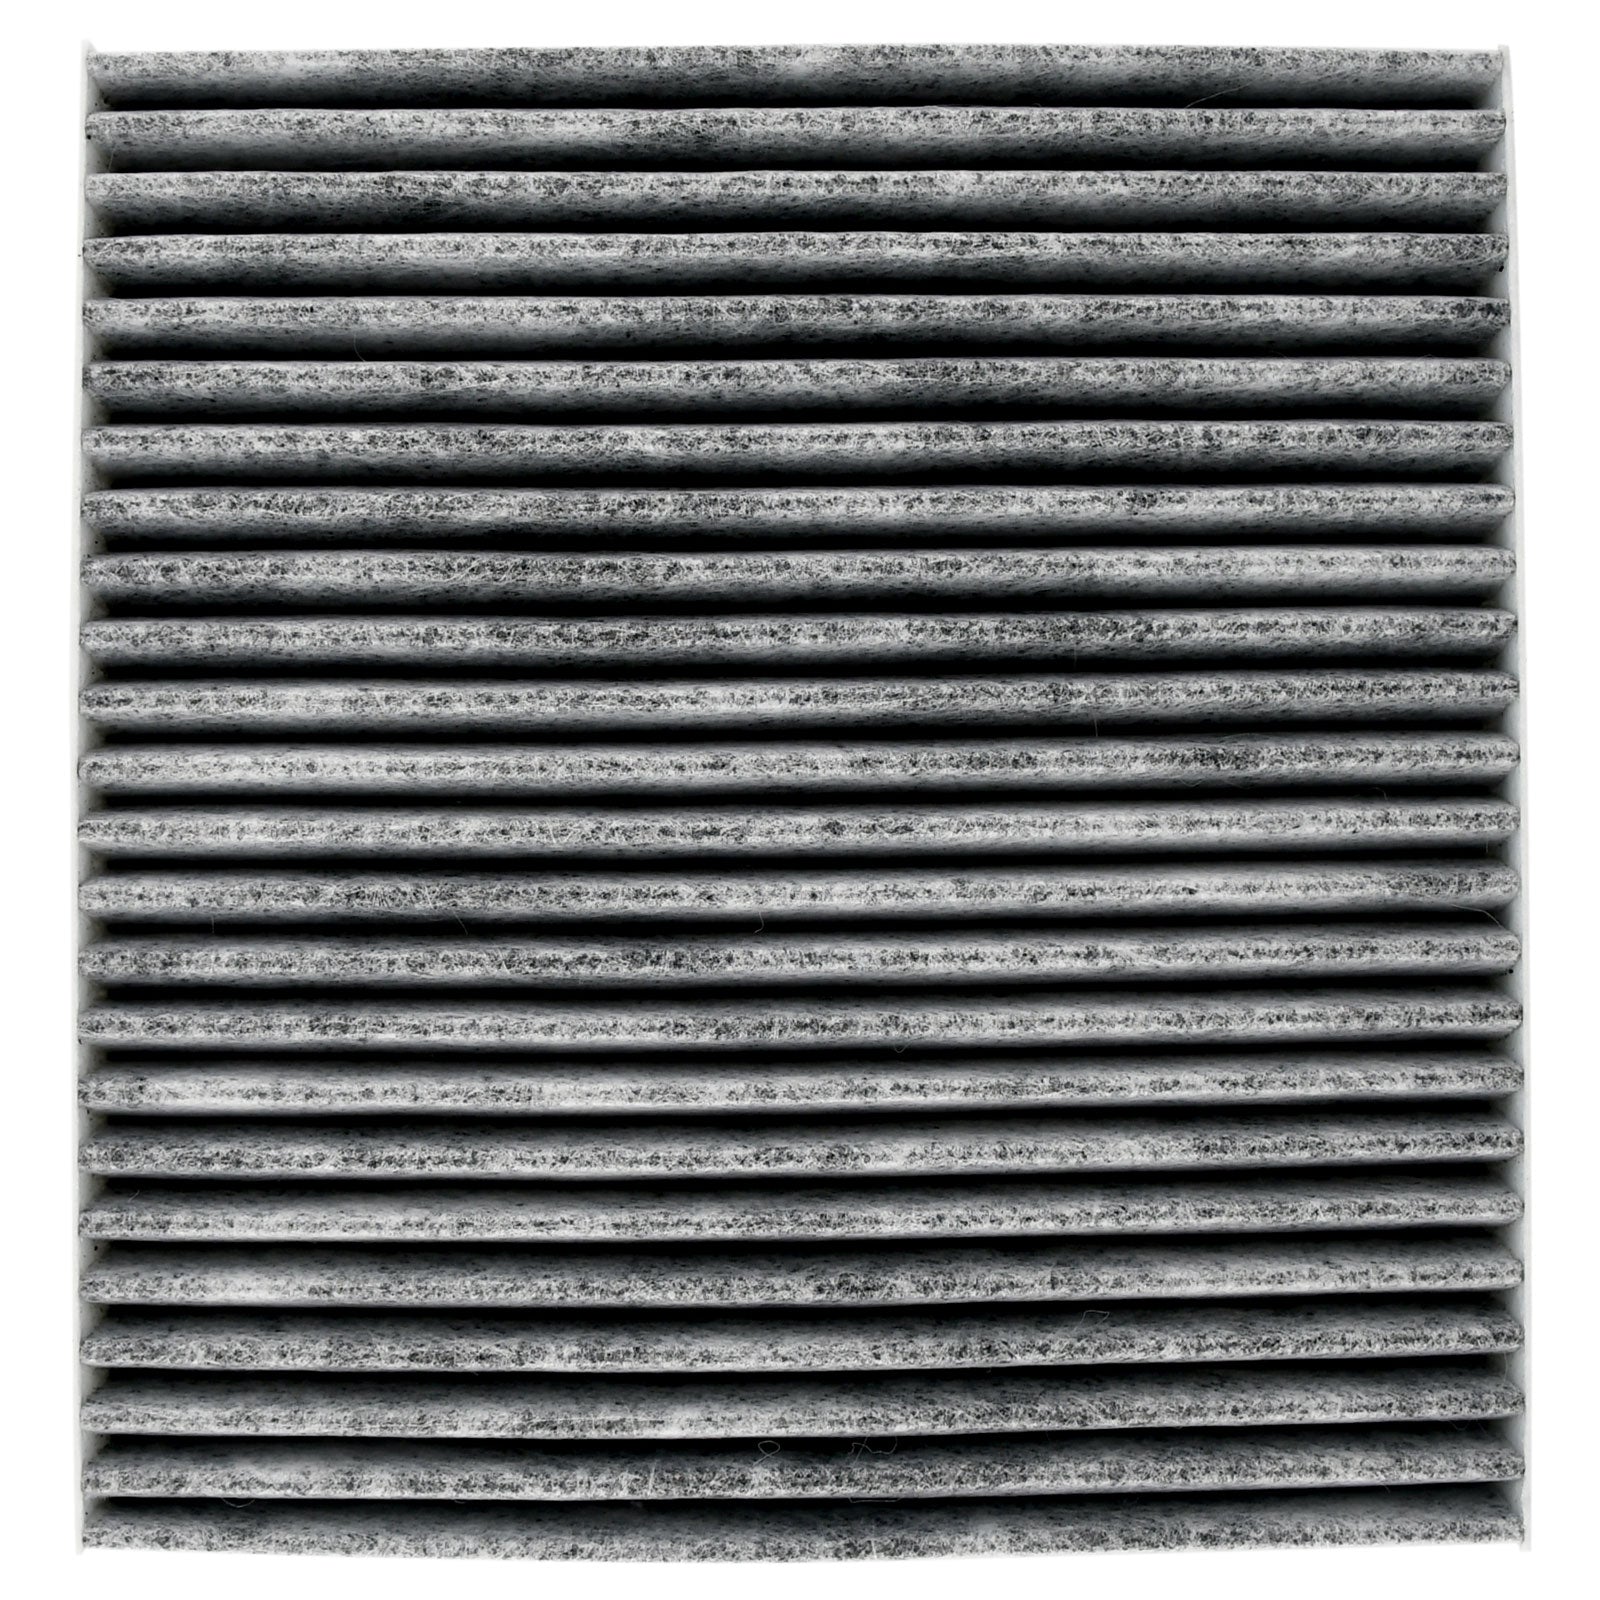 JADODE Cabin Air Filter Fresh Breeze For 2007-2018 Ford Edge Lincoln MKX Mazda CX-9